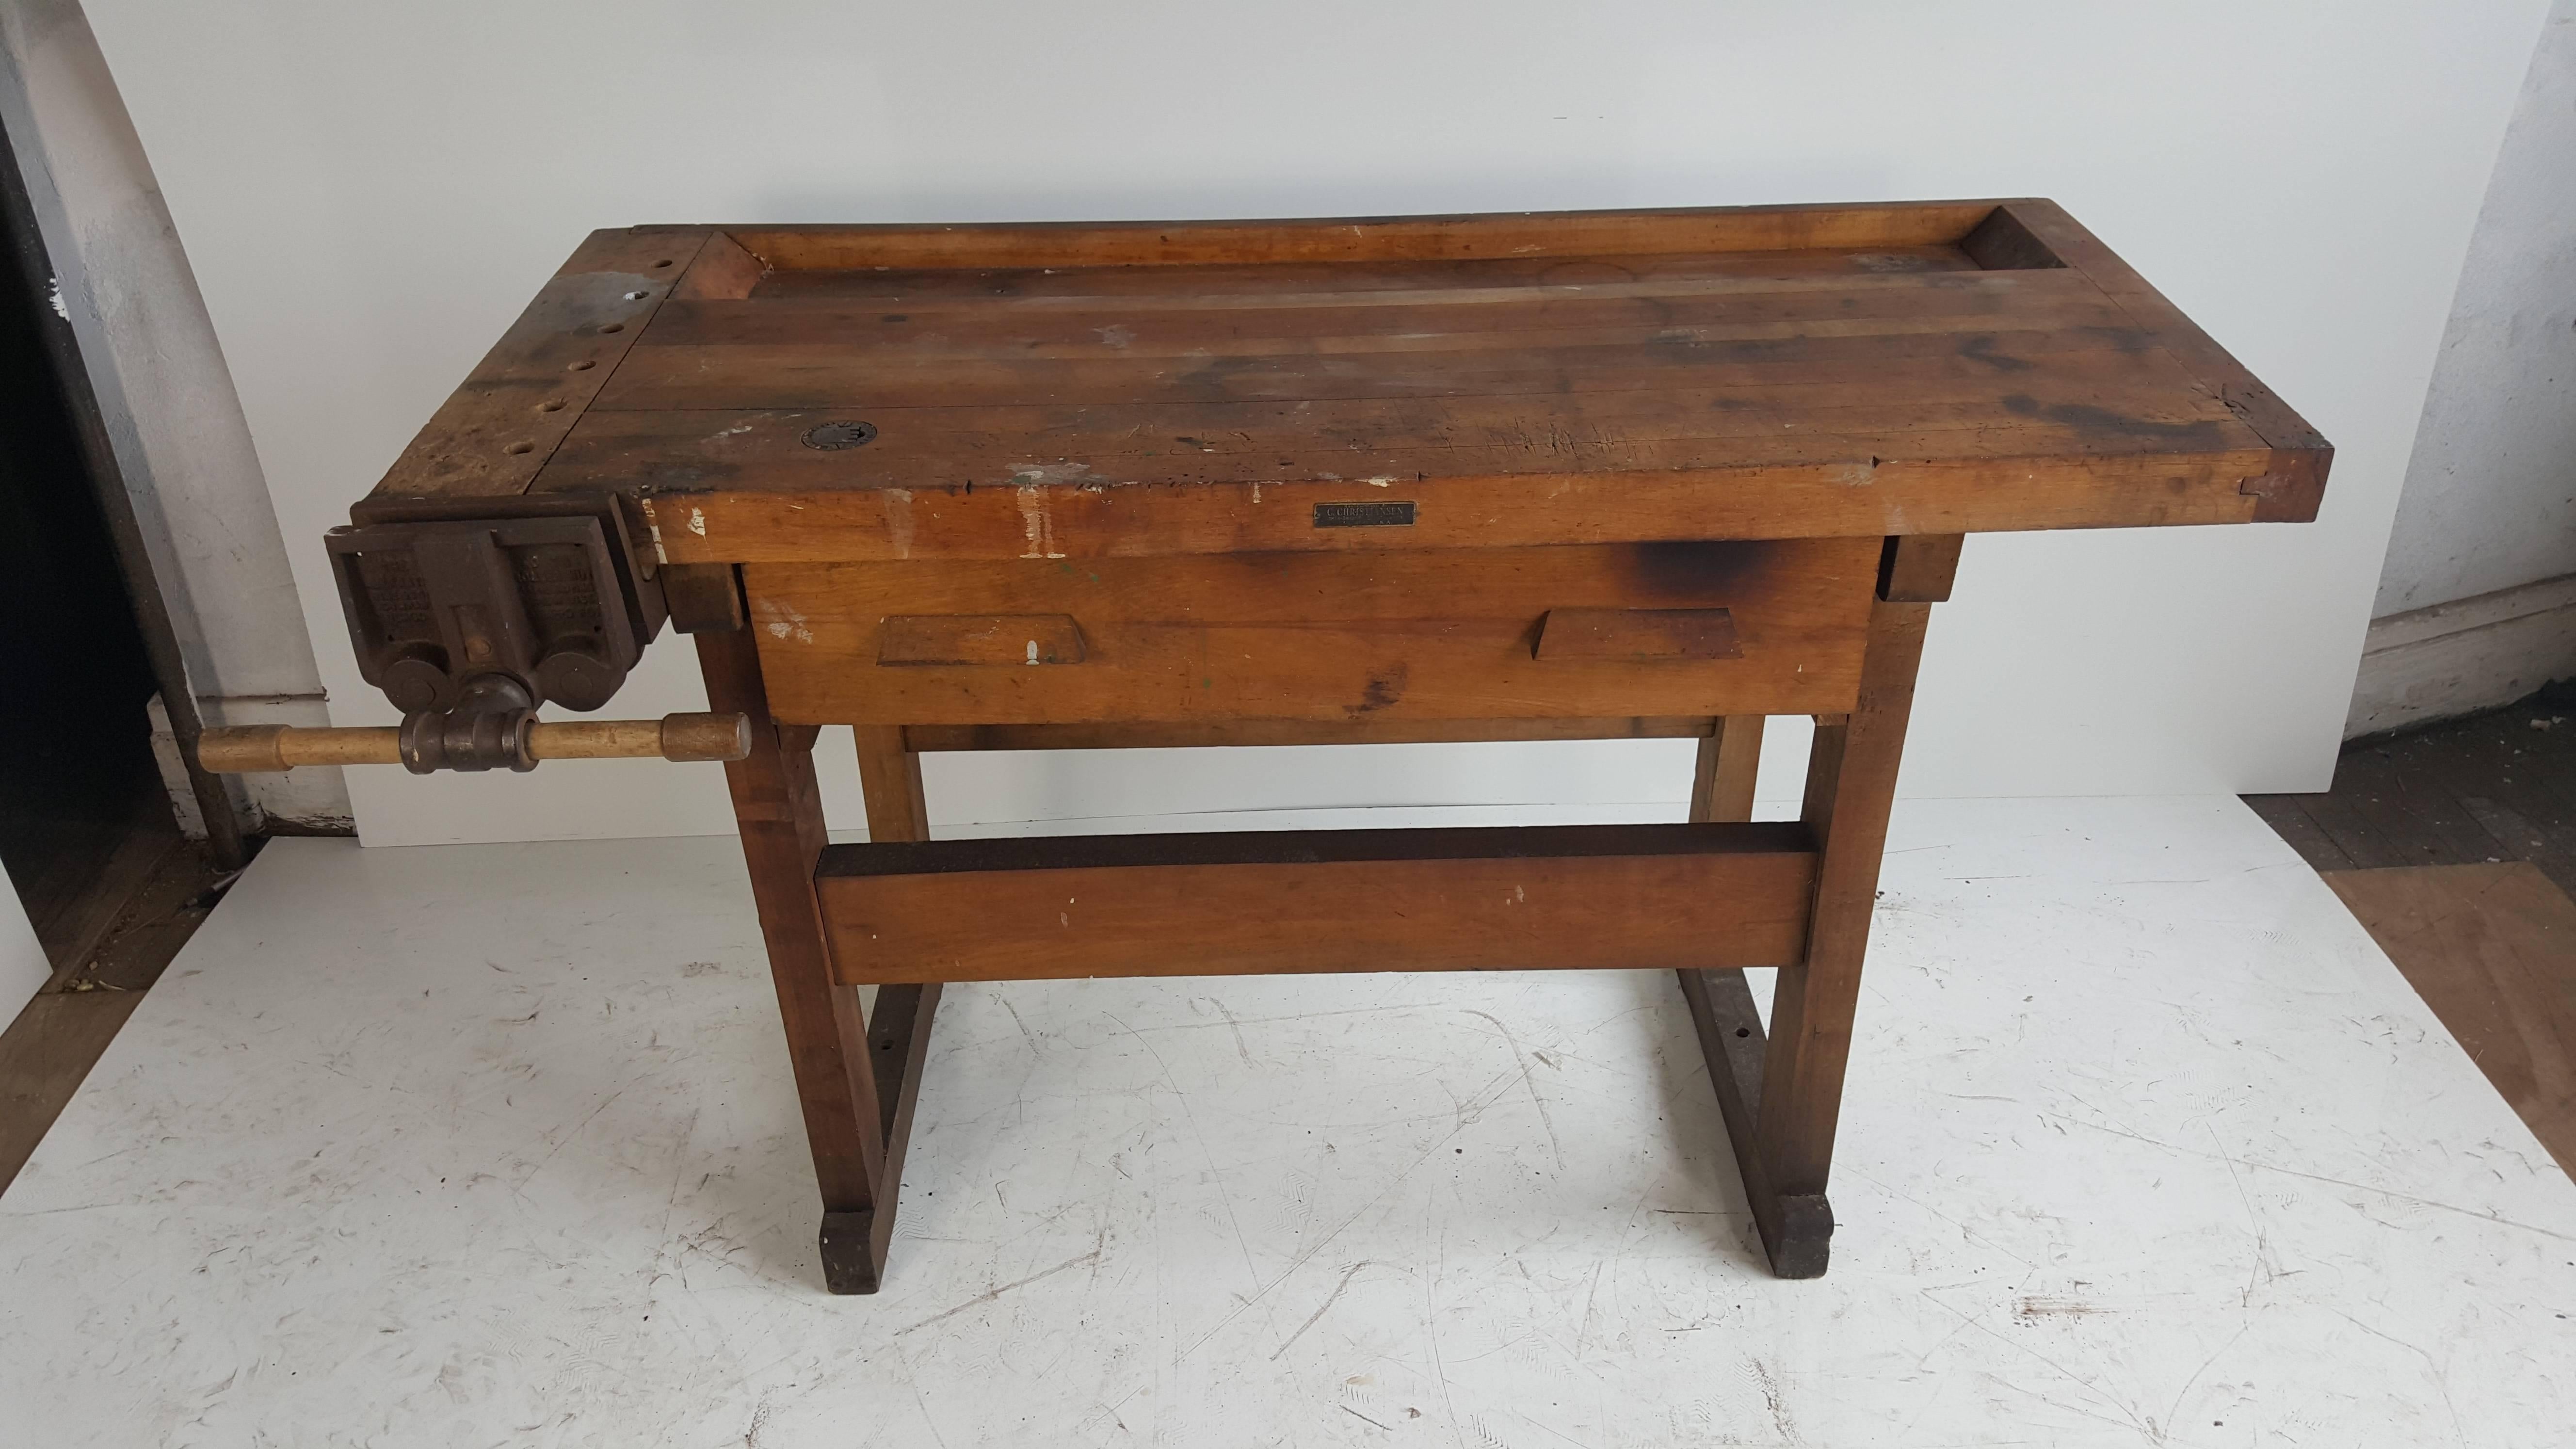 C. Christiansen Industrial work bench, desk, island, work space, unusual small size, wonderful finish surface, patina, dovetail joints. Superior quality and construction. Retains original Abernathy vice with original handle.